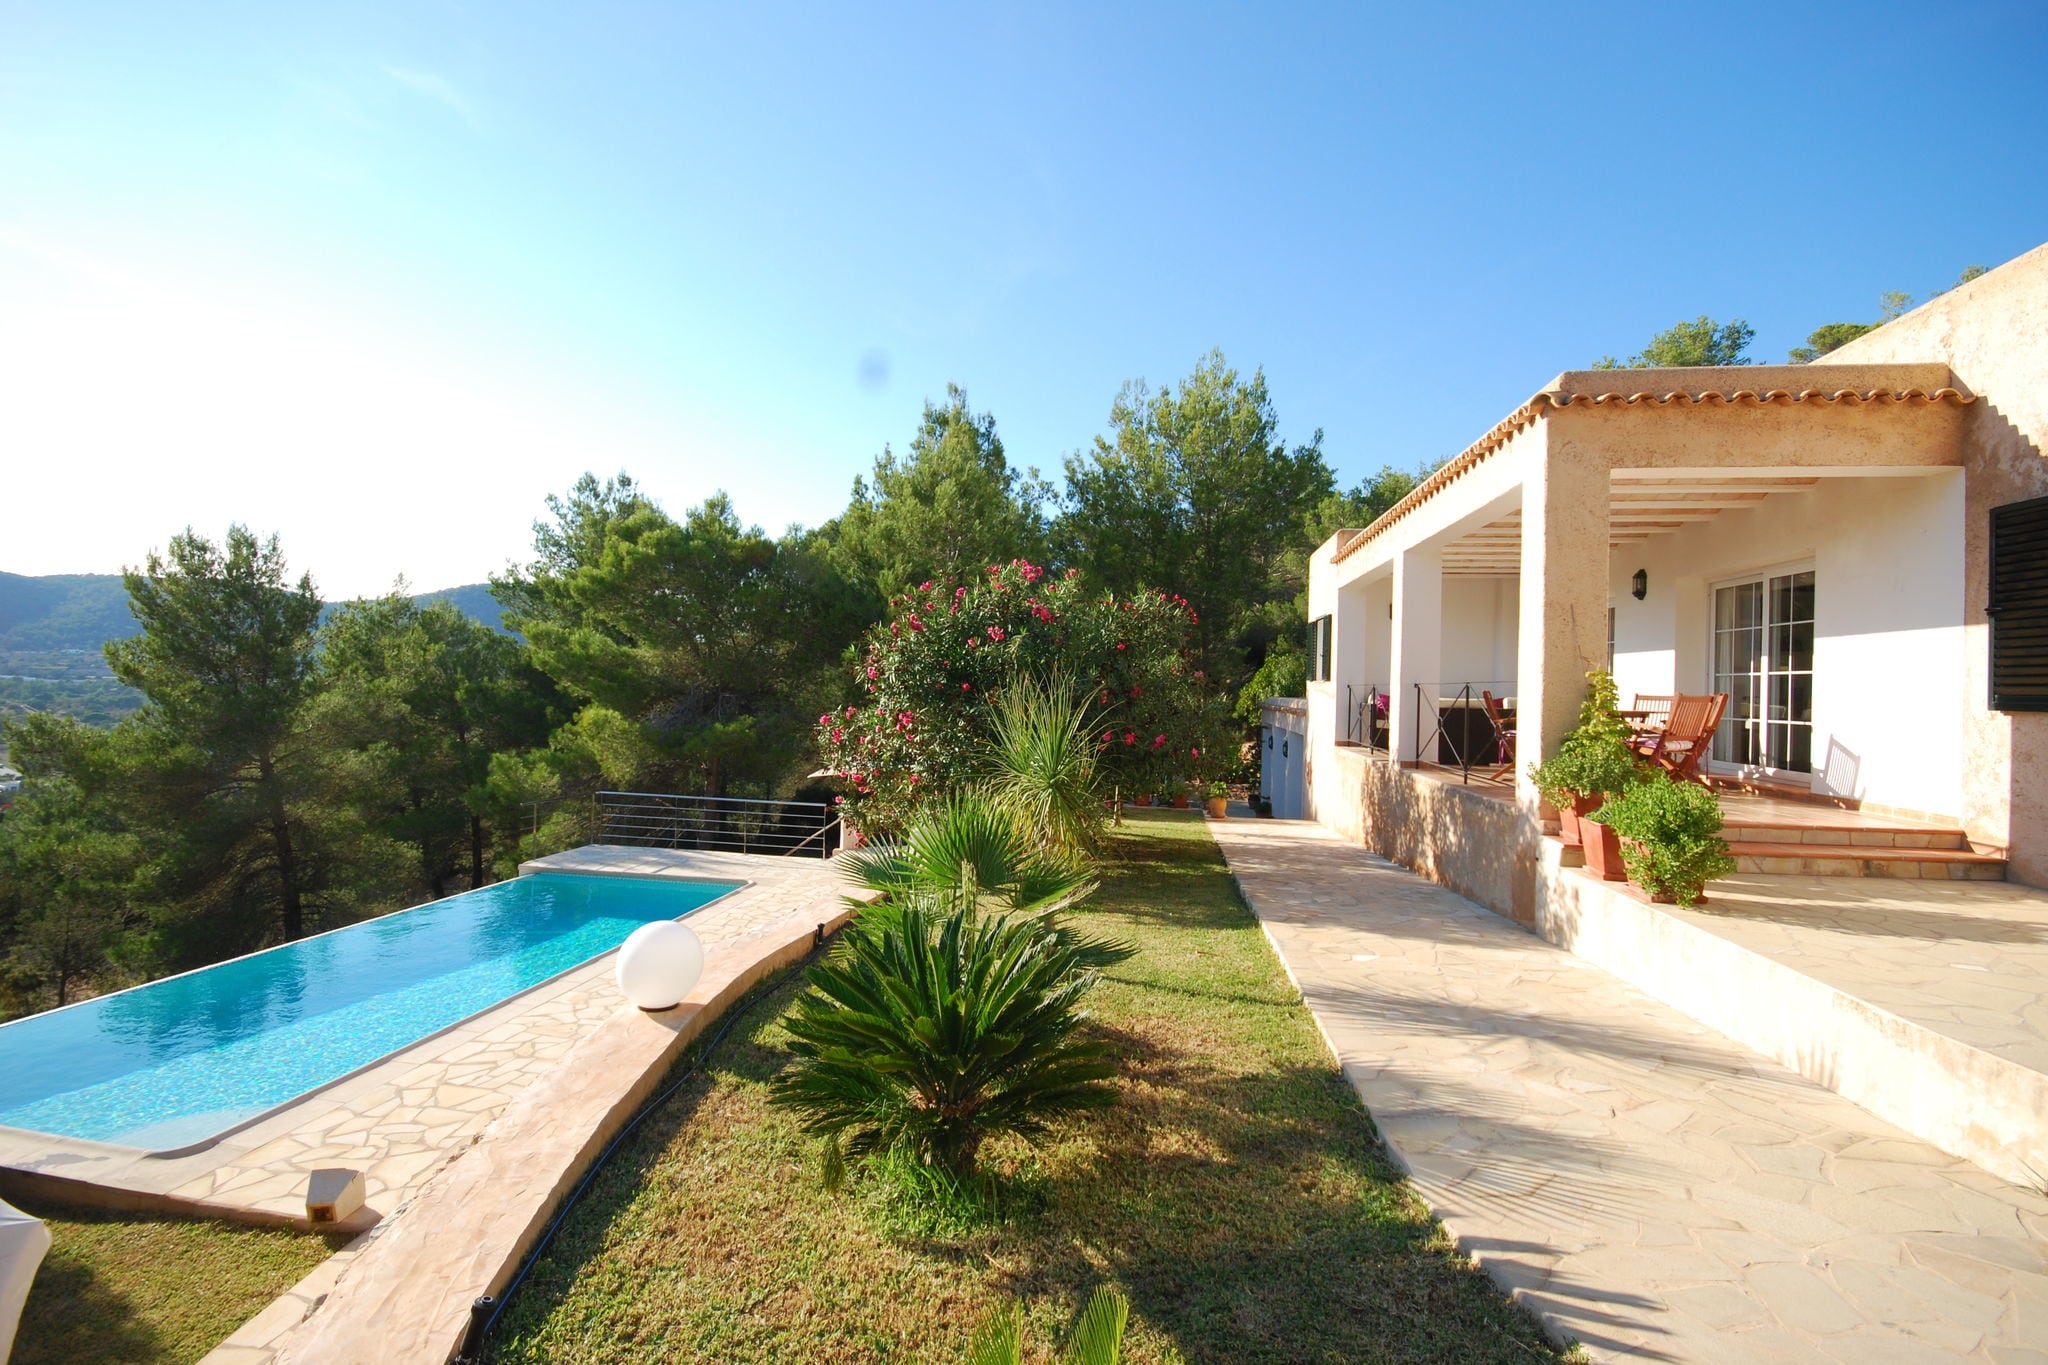 Detached villa in Ibiza with great views of the hills